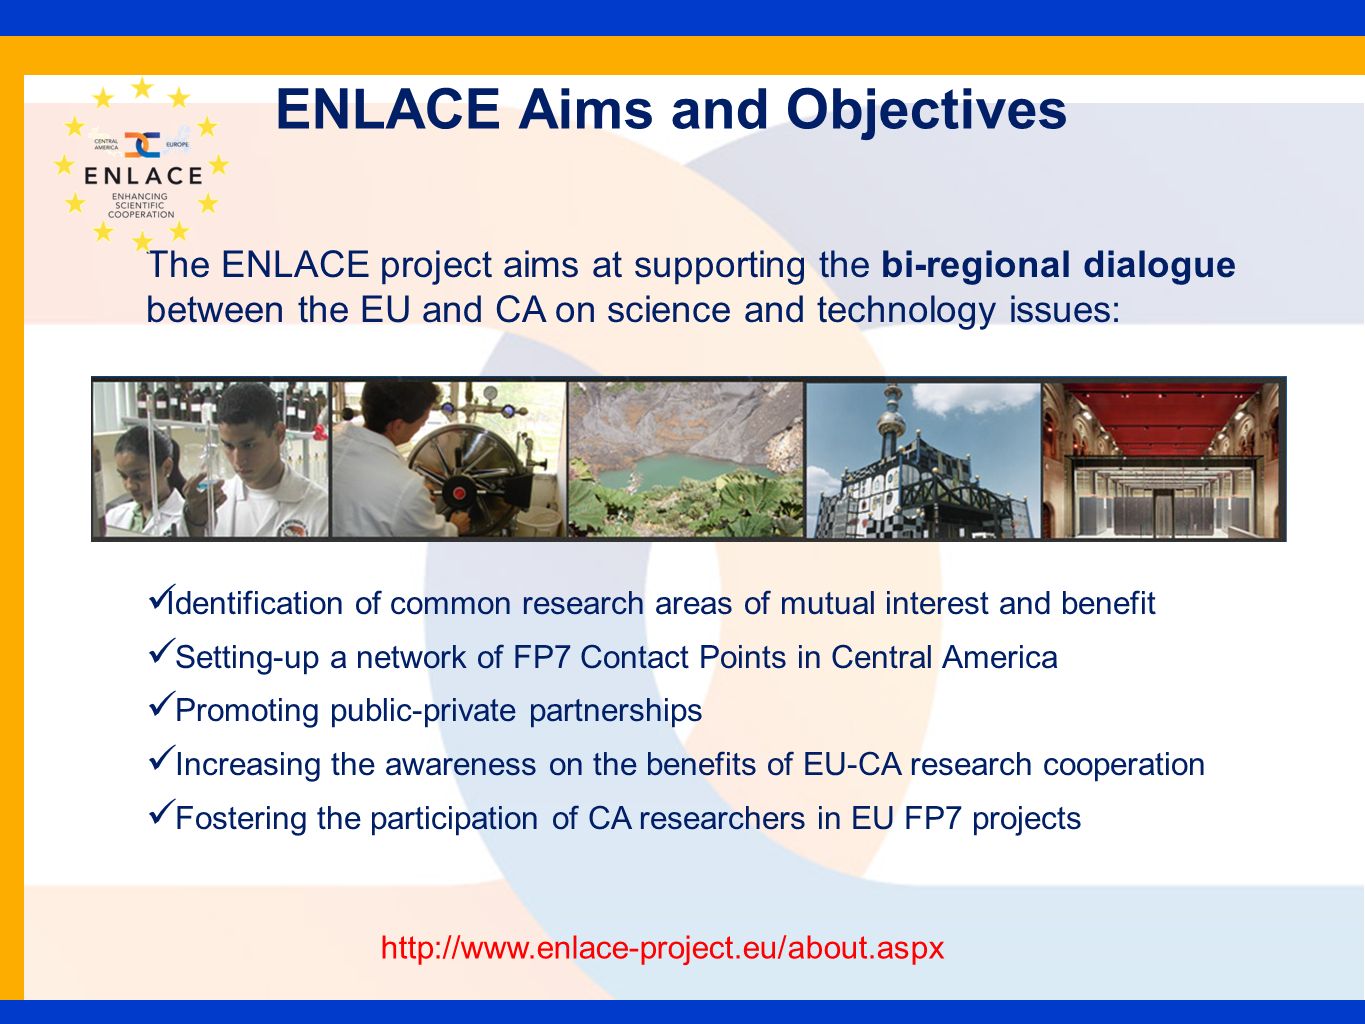 ENLACE Aims and Objectives The ENLACE project aims at supporting the bi-regional dialogue between the EU and CA on science and technology issues: Identification of common research areas of mutual interest and benefit Setting-up a network of FP7 Contact Points in Central America Promoting public-private partnerships Increasing the awareness on the benefits of EU-CA research cooperation Fostering the participation of CA researchers in EU FP7 projects